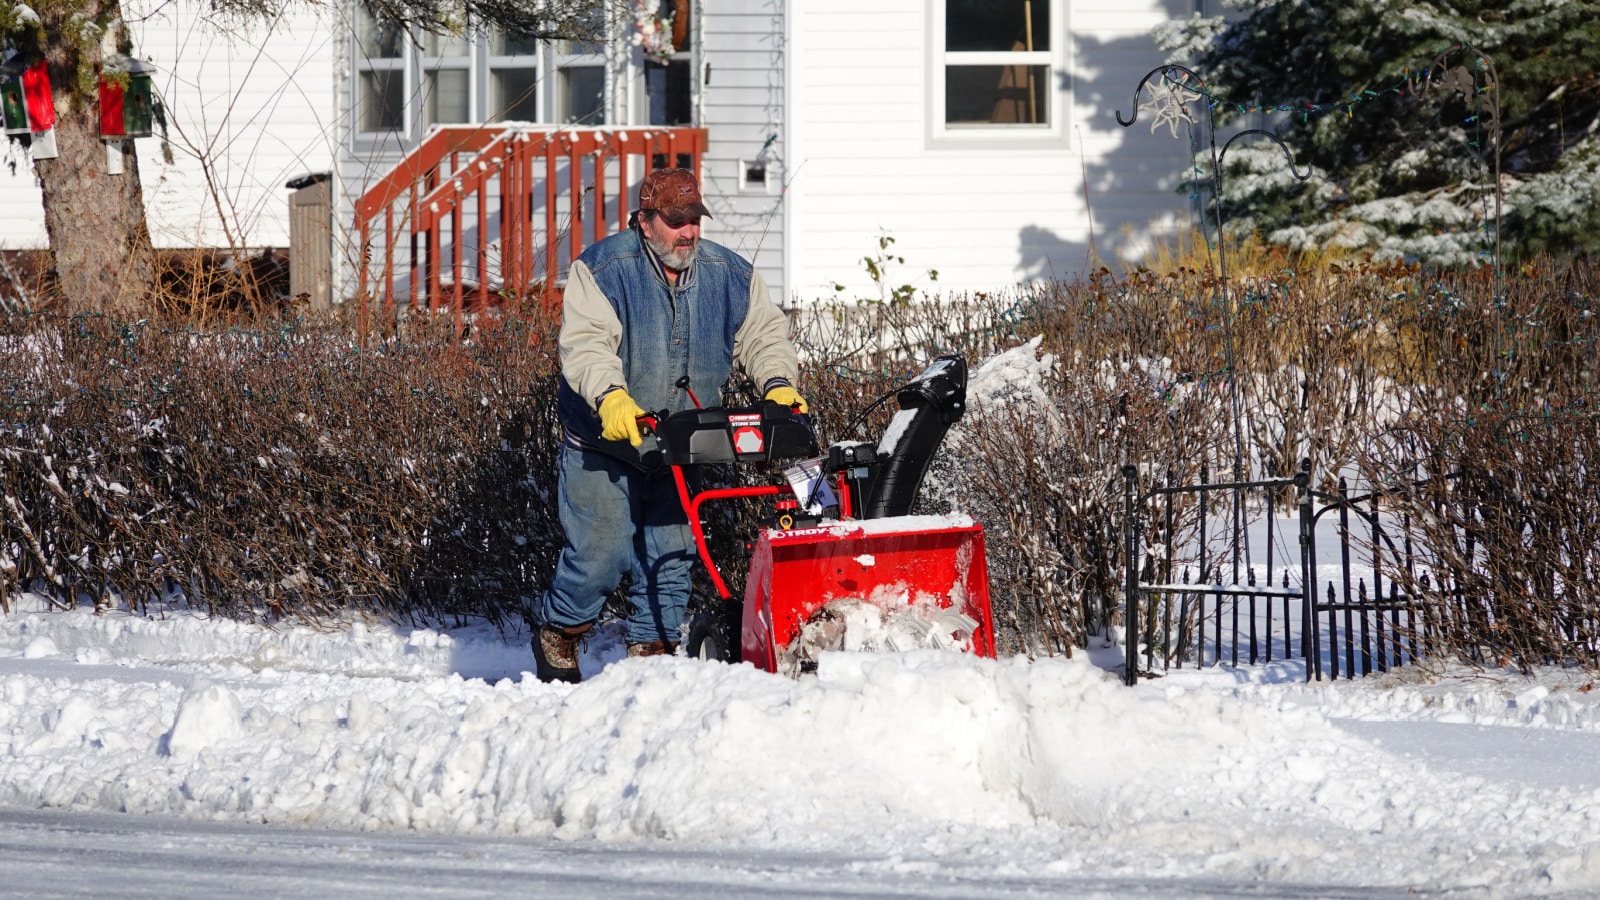 Mauston, Wisconsin USA - December 20th, 2021: Community members use snow plows to plow the snow from the sidewalks.